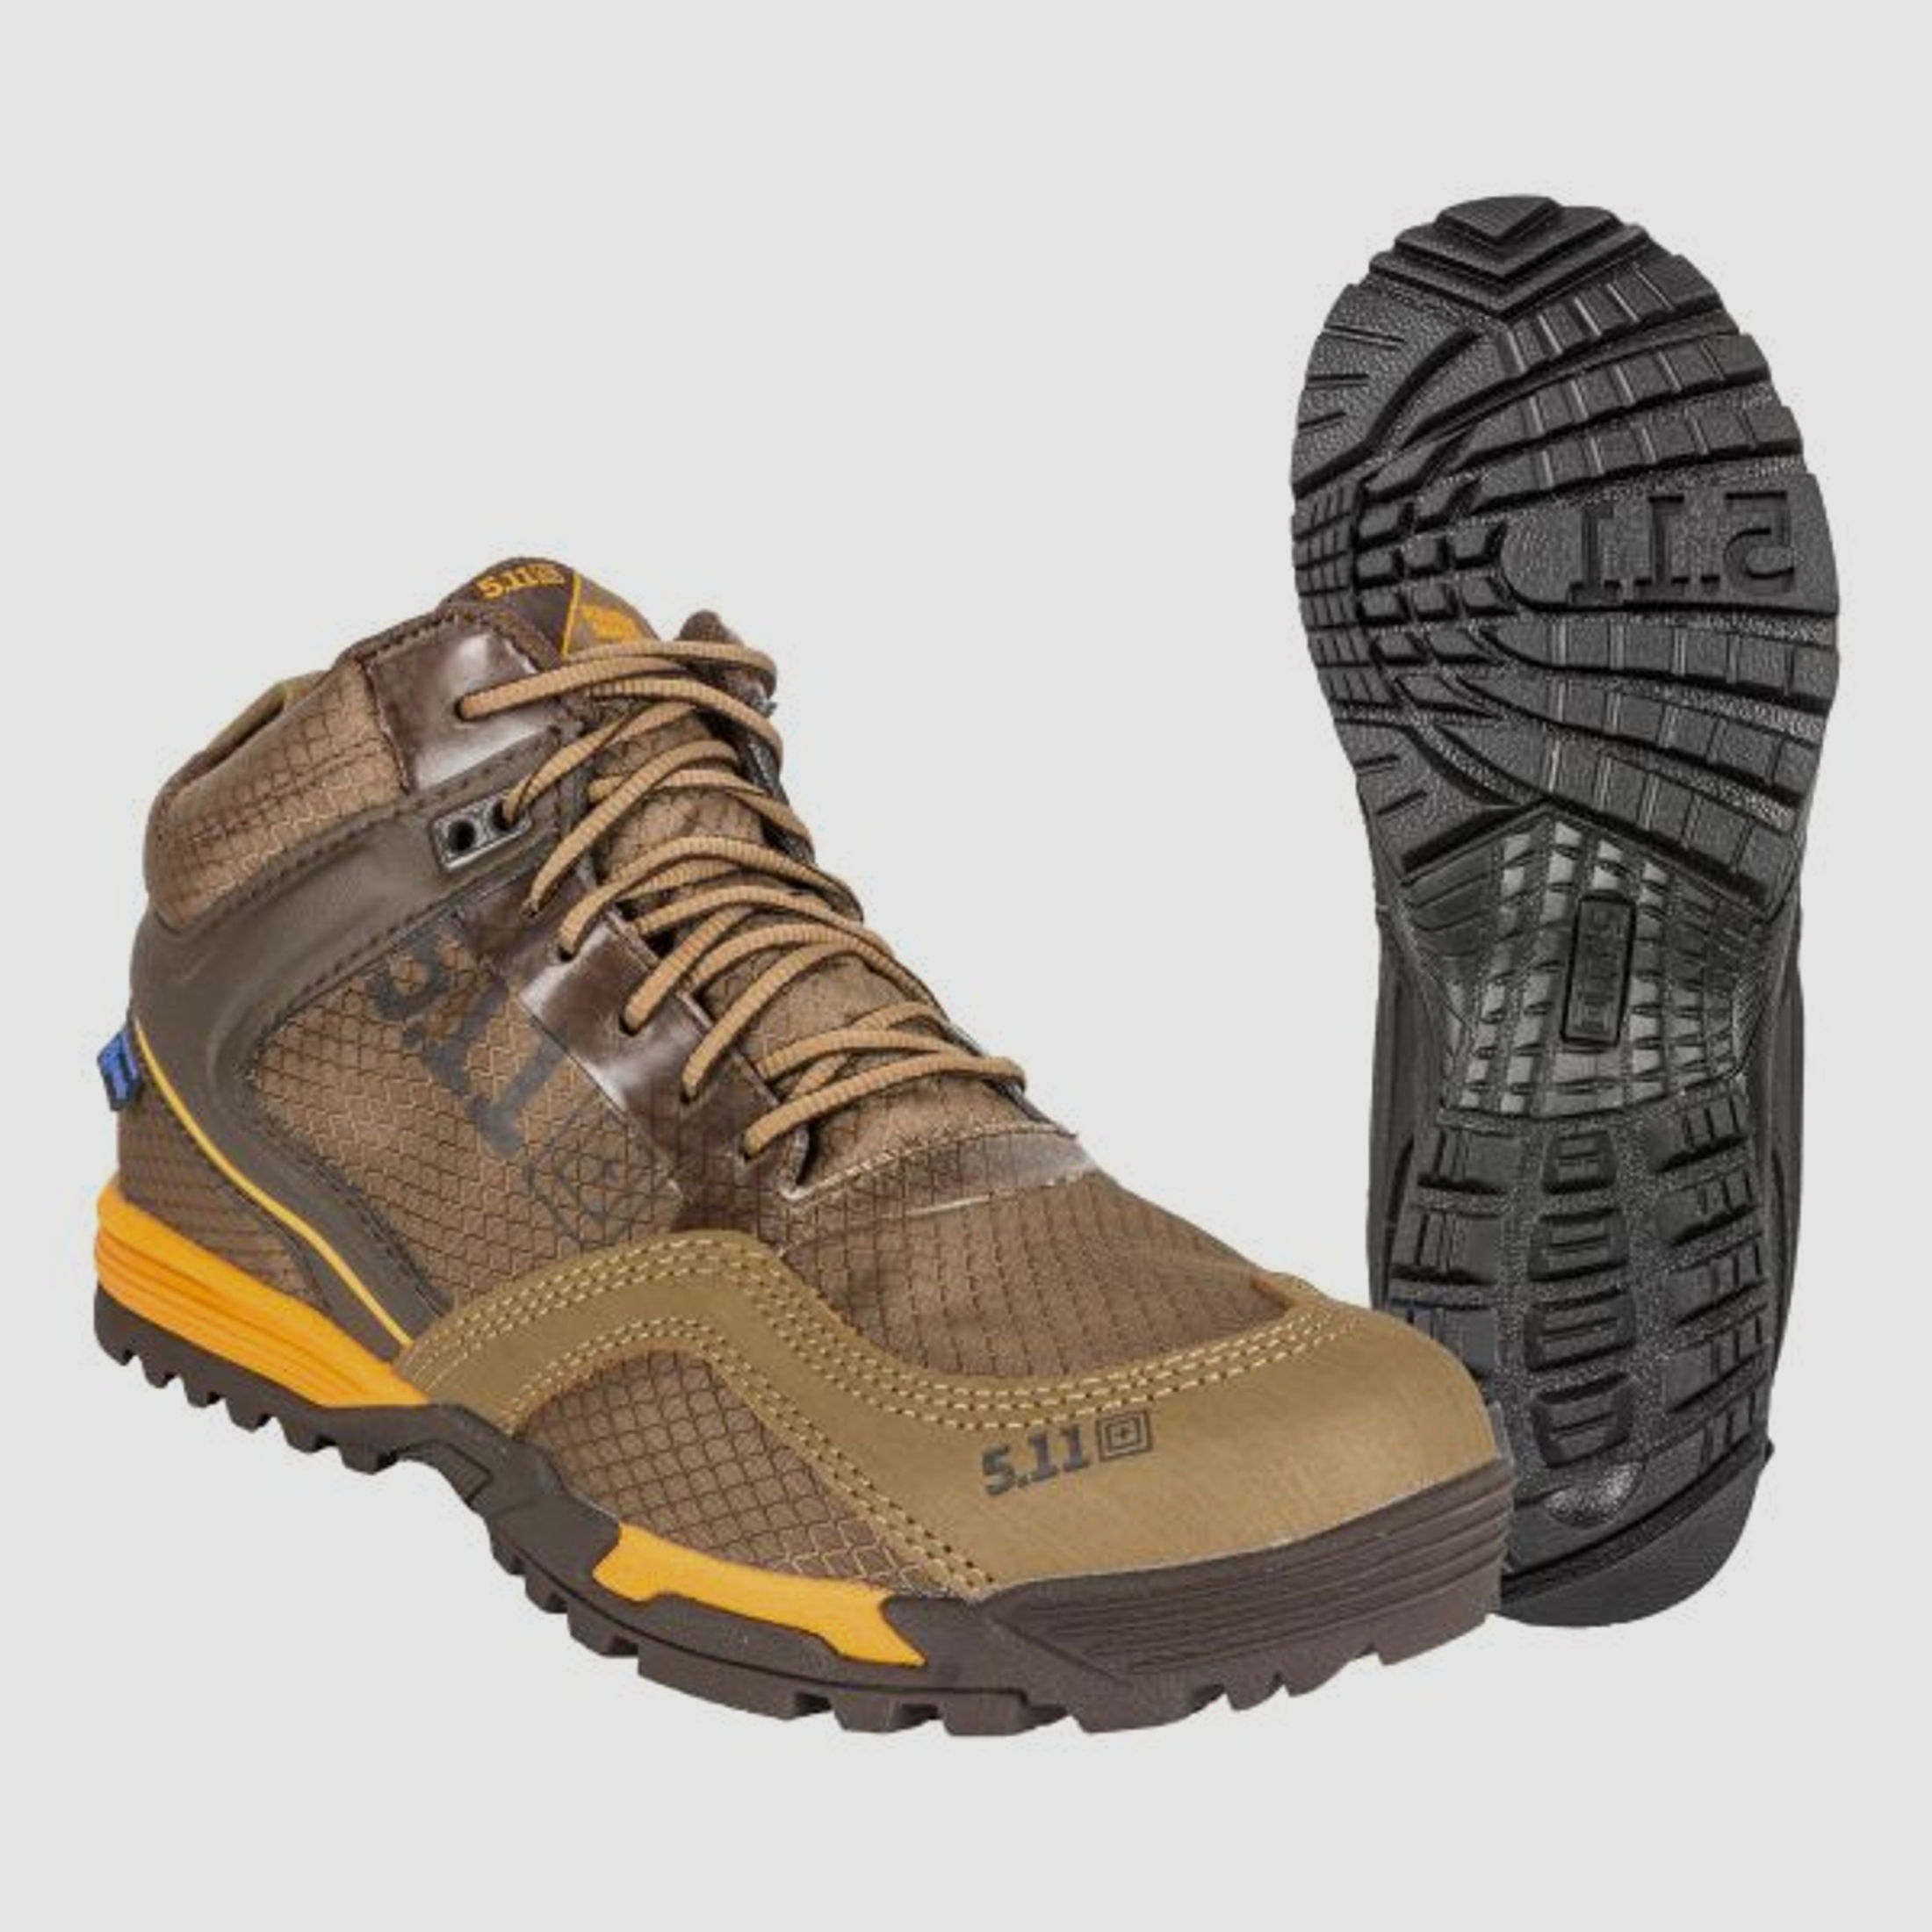 5.11 Tactical 5.11 Stiefel Range Master coyote